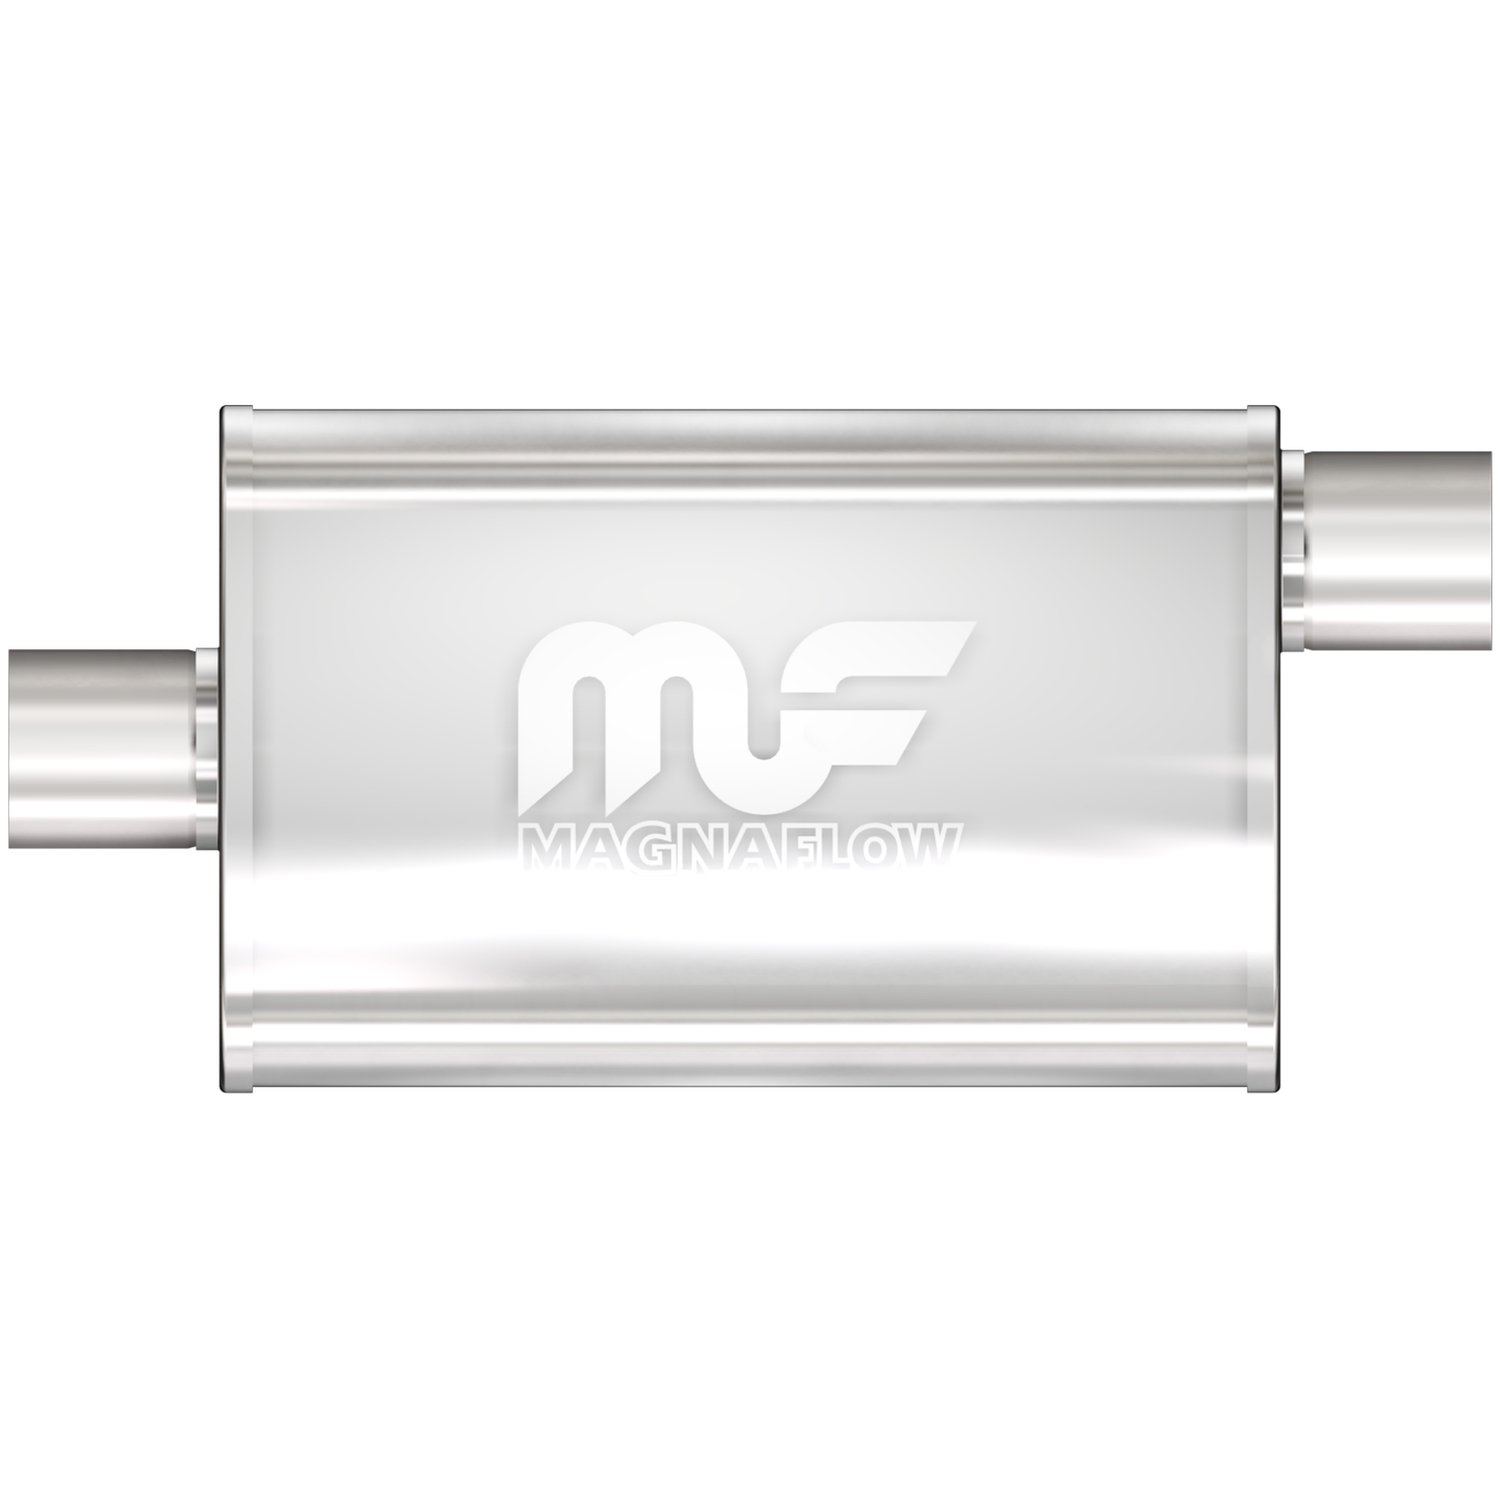 4" x 9" Oval Muffler Offset In/Center Out: 3" Body Length: 18" Overall Length: 24" Core Size: 3" Satin Finish